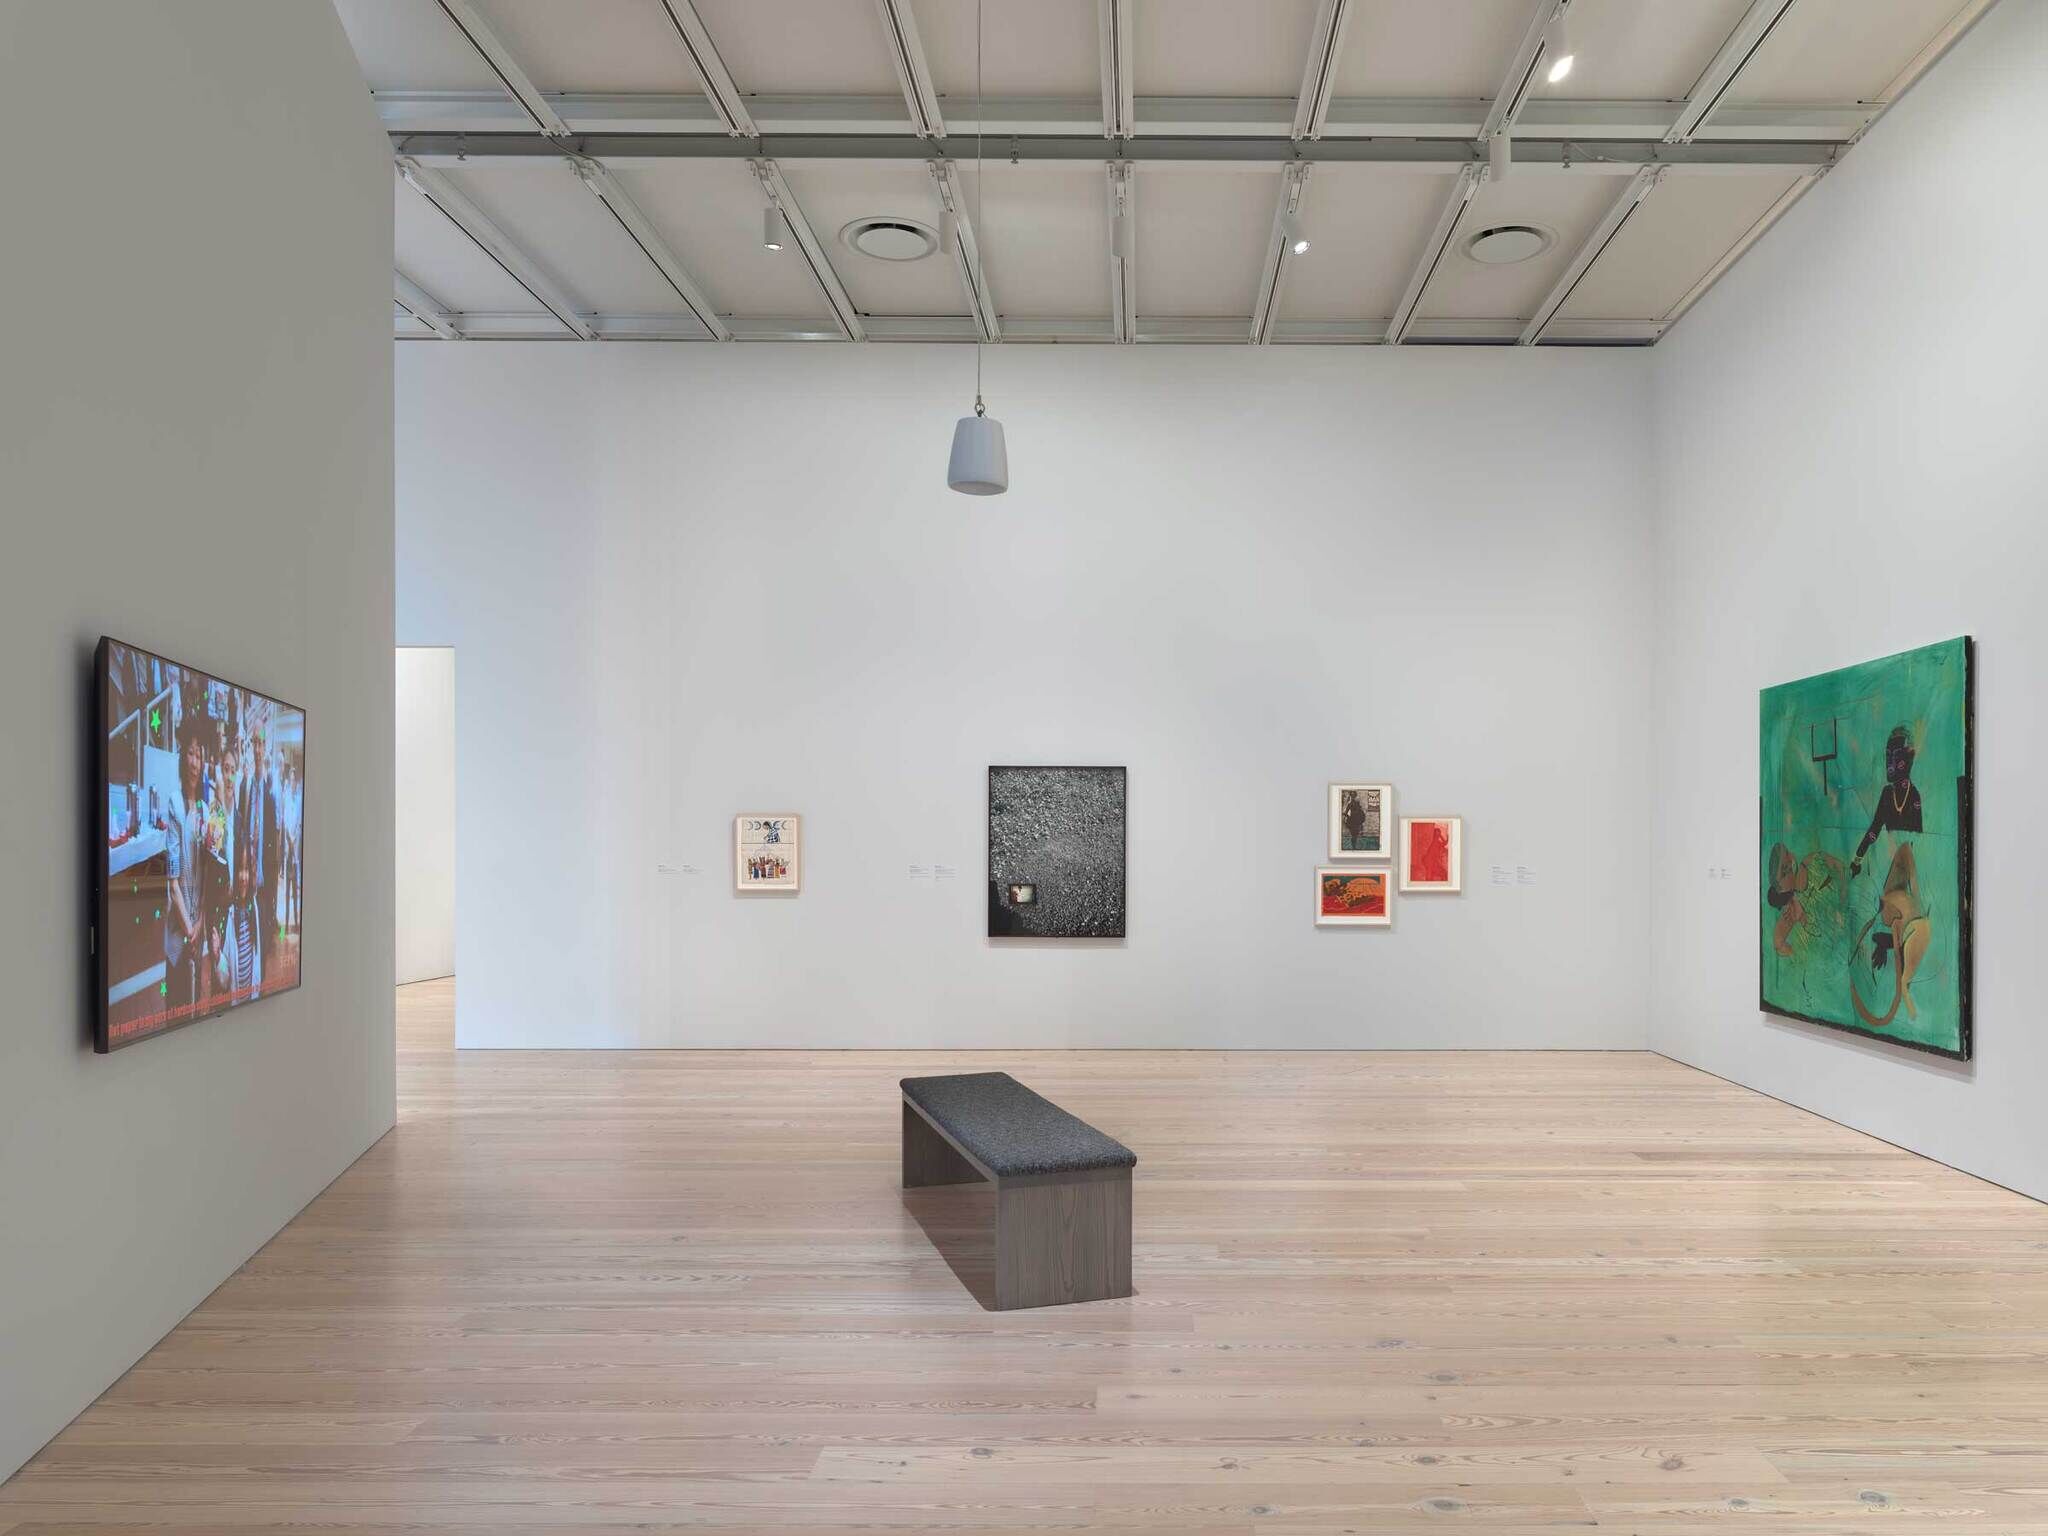 A gallery with a screen on the left, 5 photographs and paintings in the middle wall, and a big green painting on the right.